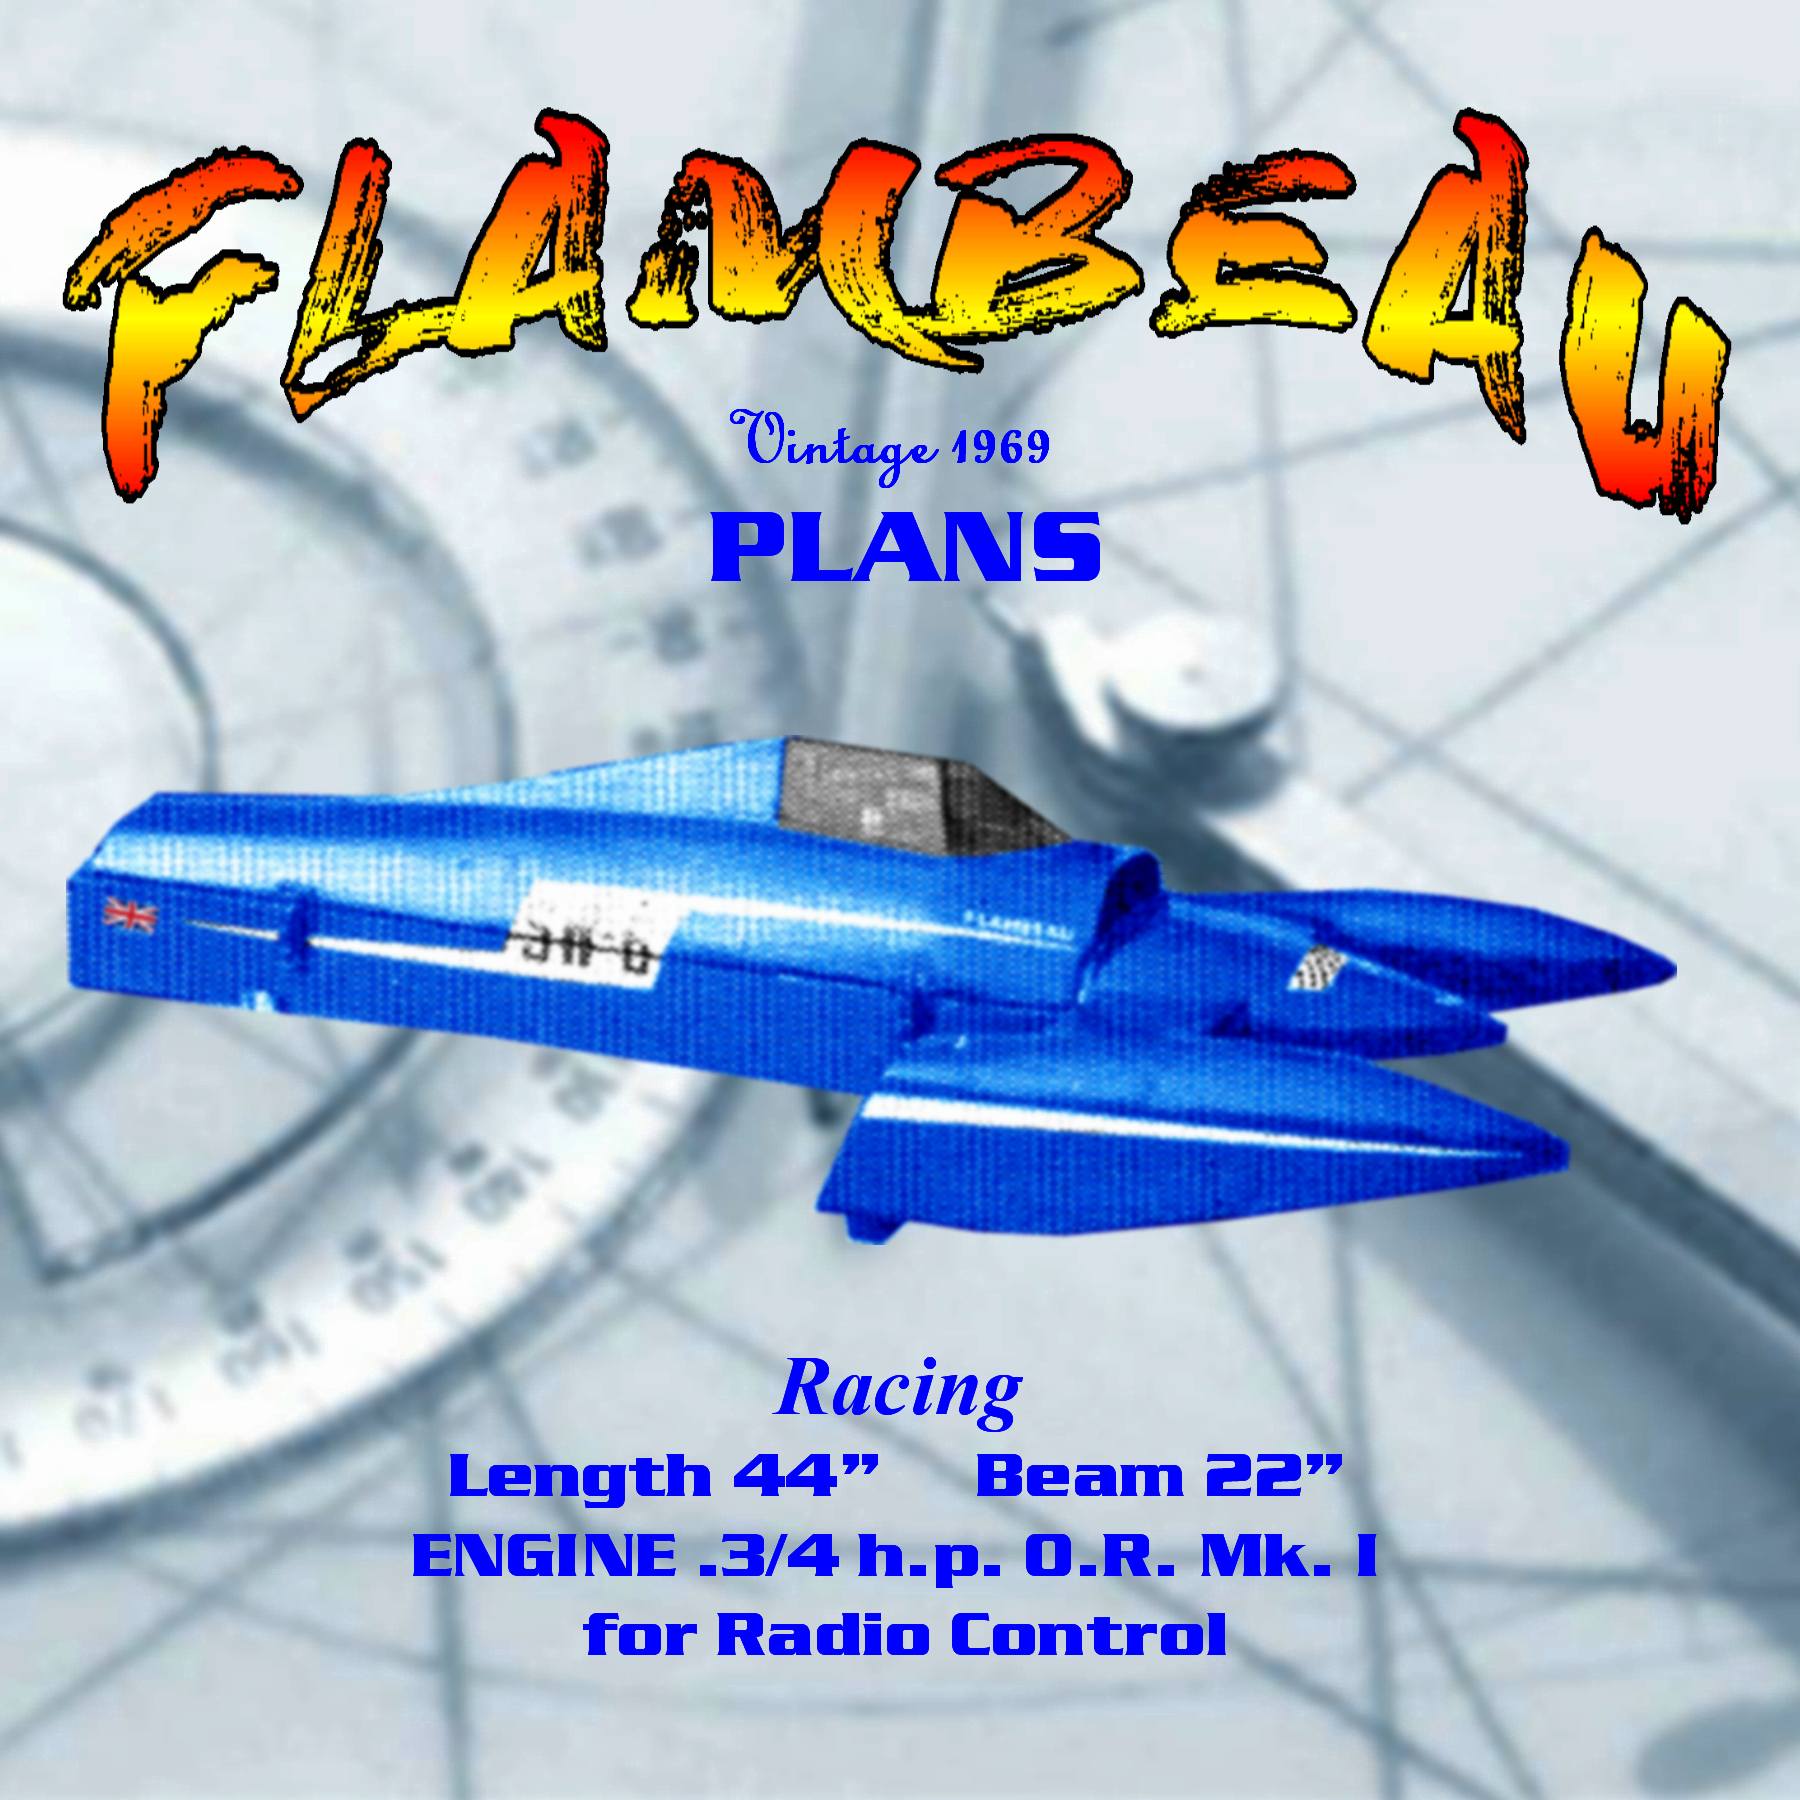 full size printed plan  44" hydroplane flambeau suitable for radio control